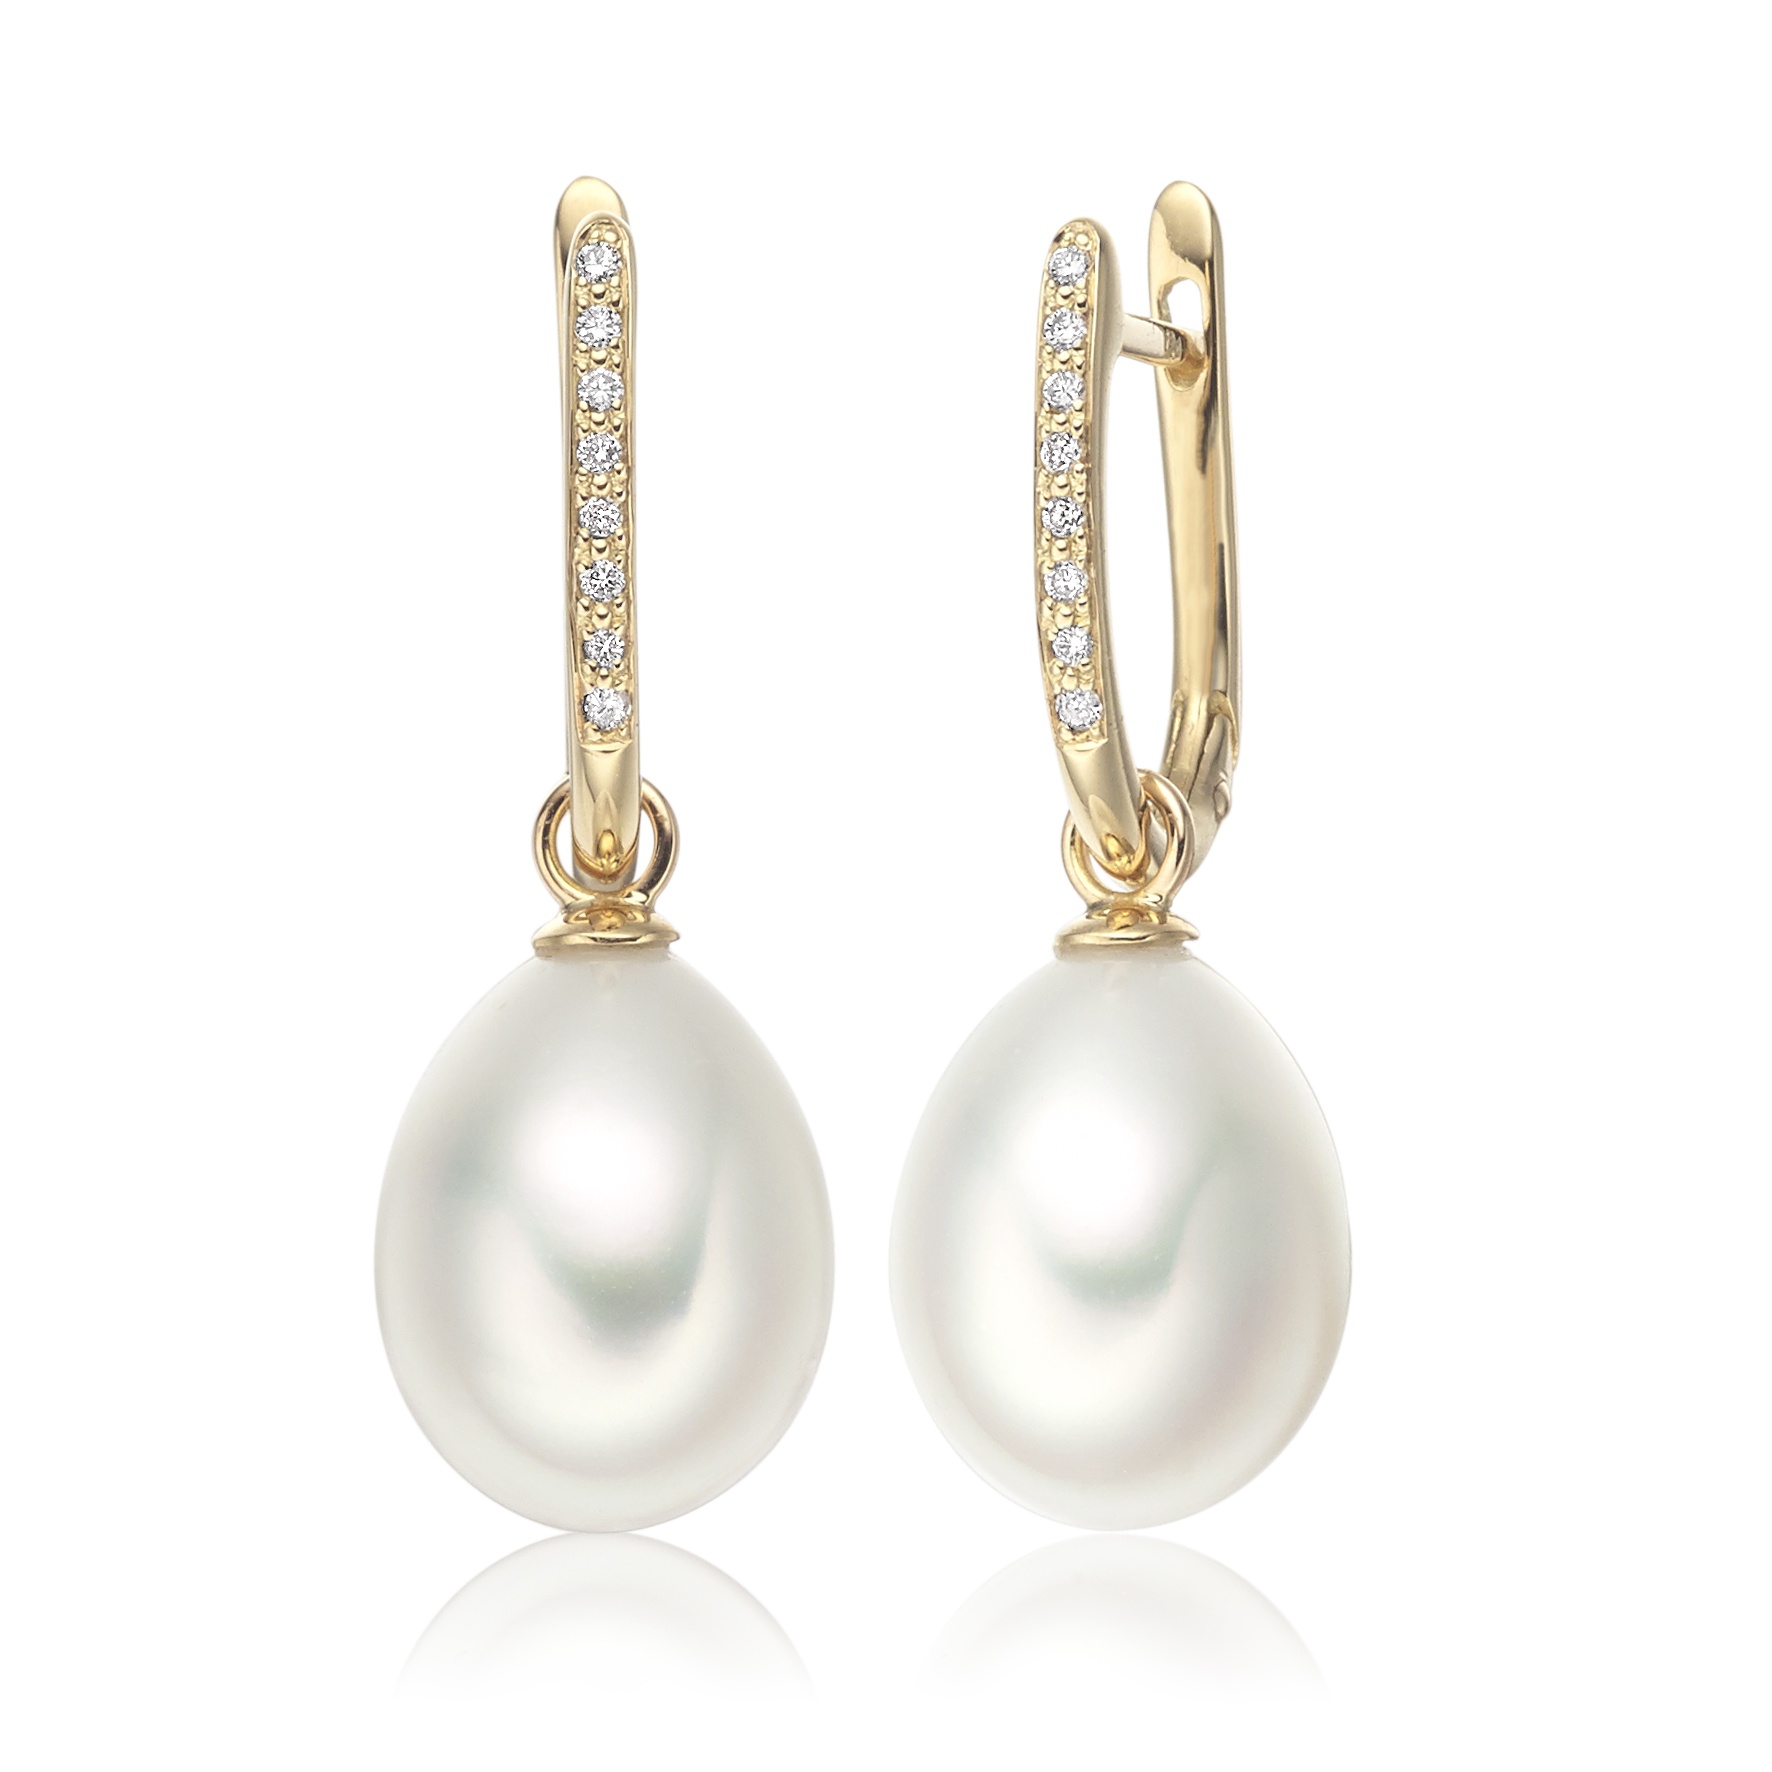 Yellow Gold Diamond Leverbacks with White Freshwater Pearls | Winterson